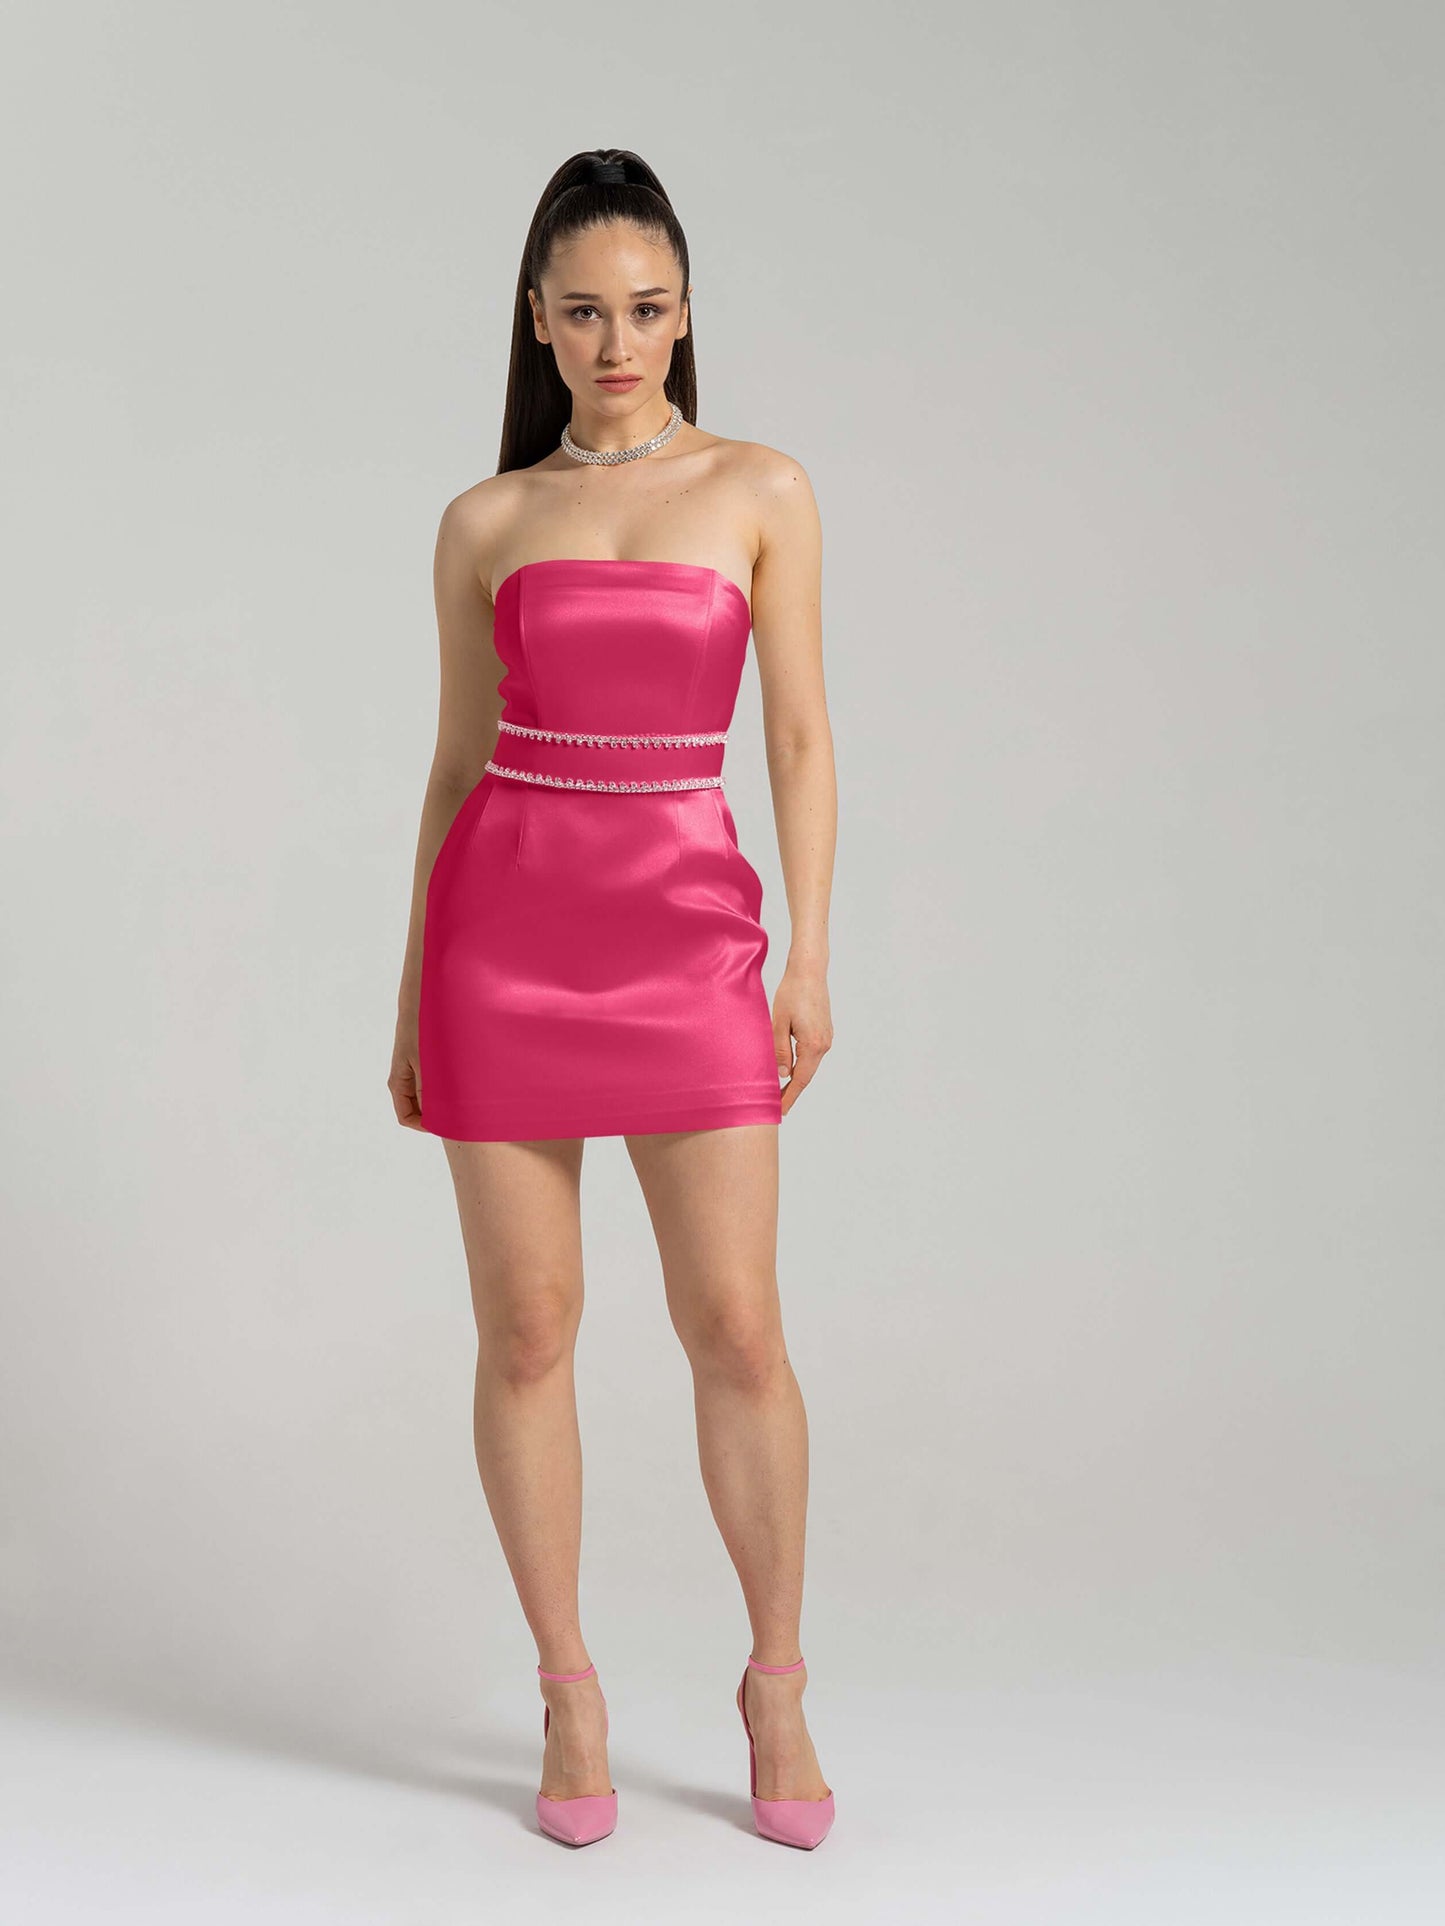 Elevated Excellence Mini Dress - Hot Pink by Tia Dorraine Women's Luxury Fashion Designer Clothing Brand